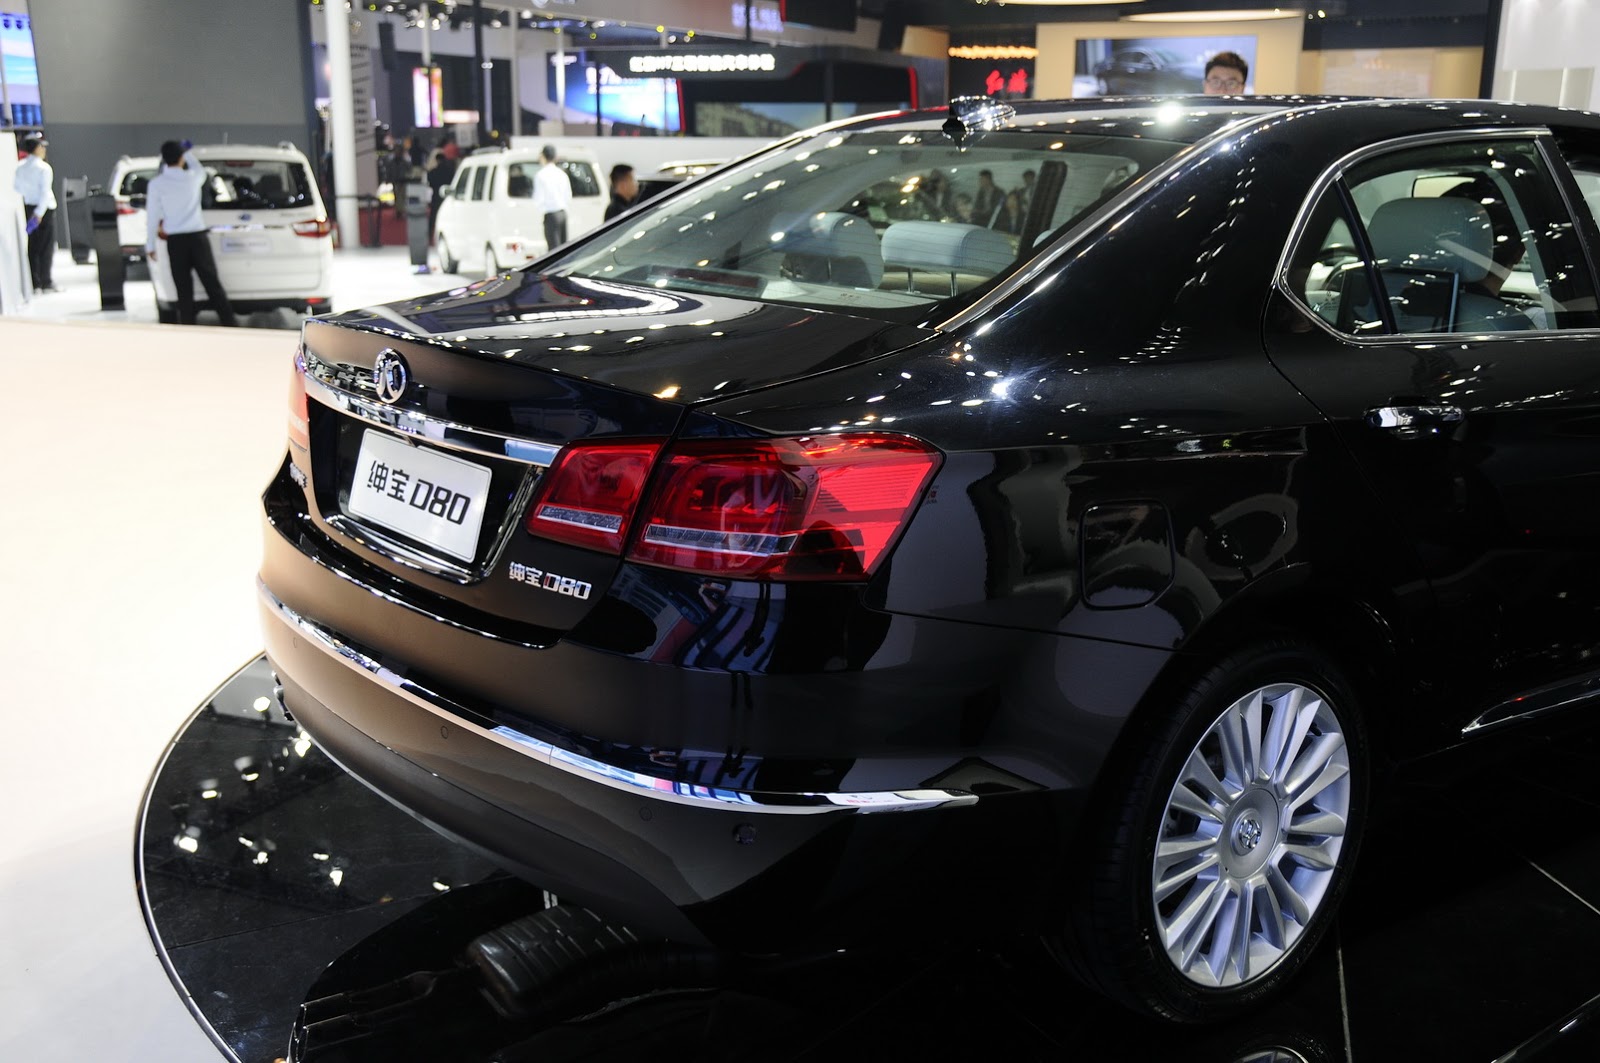 Shenbao’s Mercedes-Based D80 Flagship Is Playing With House Money ...